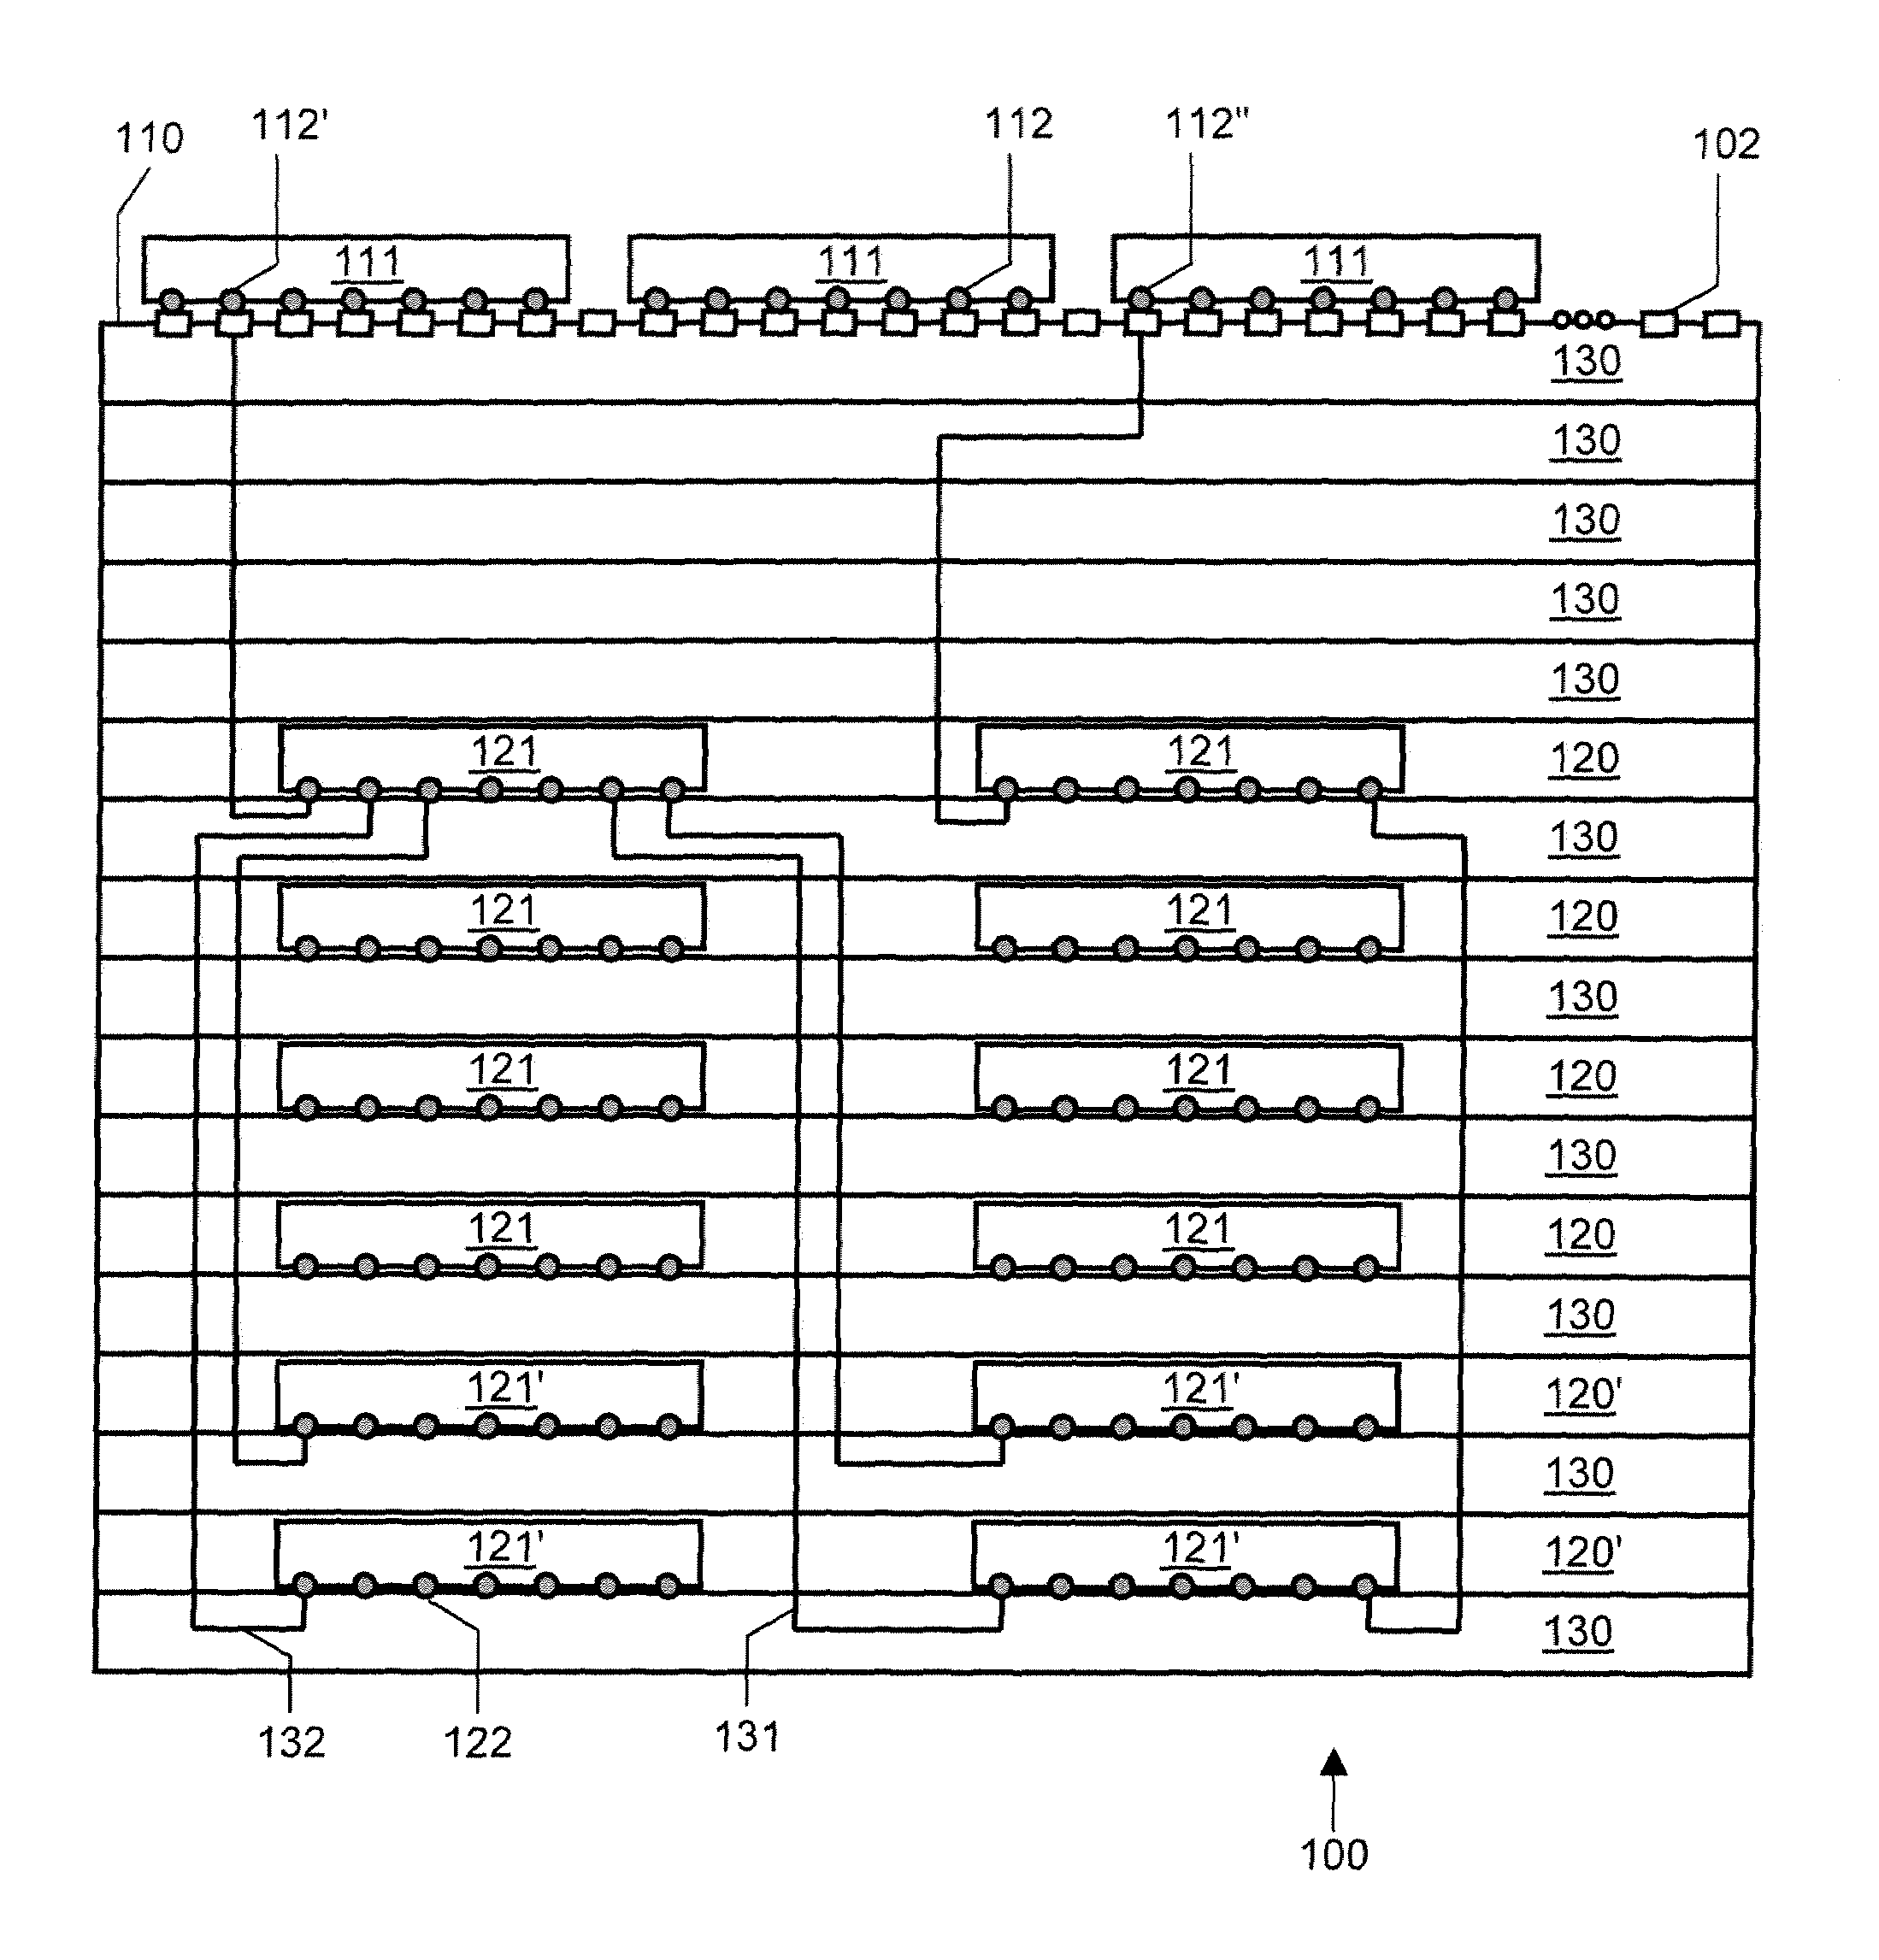 Reprogrammable circuit board with alignment-insensitive support for multiple component contact types